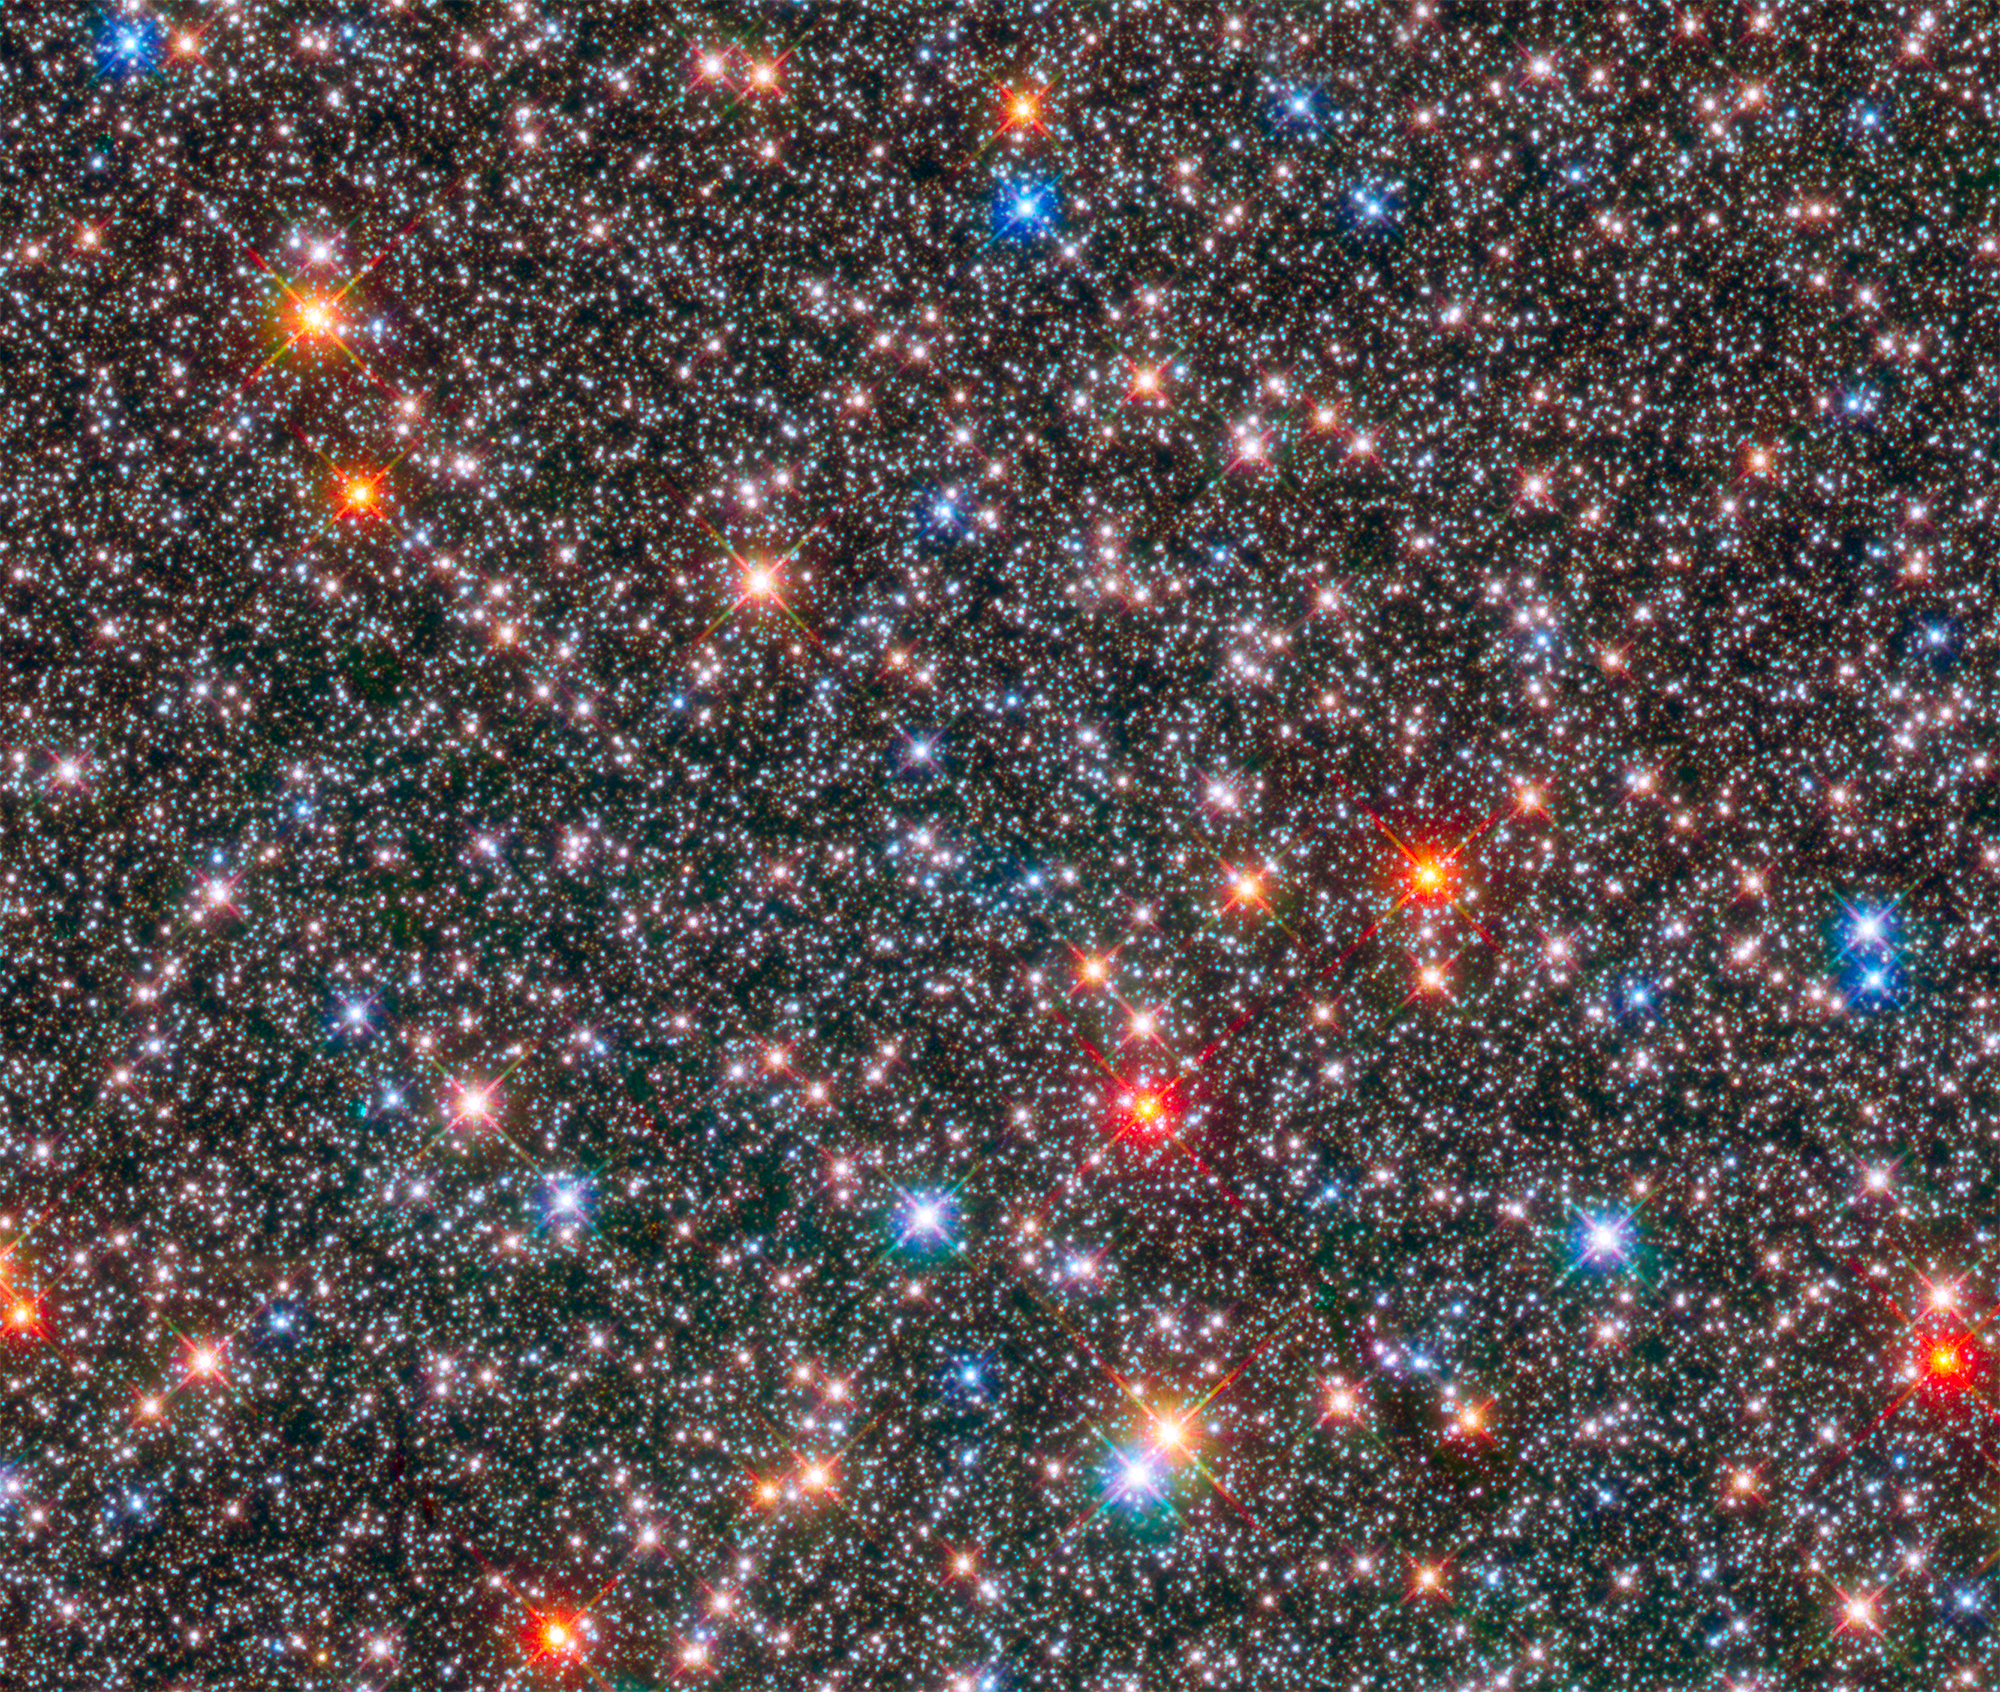 Dense field of stars in many colors